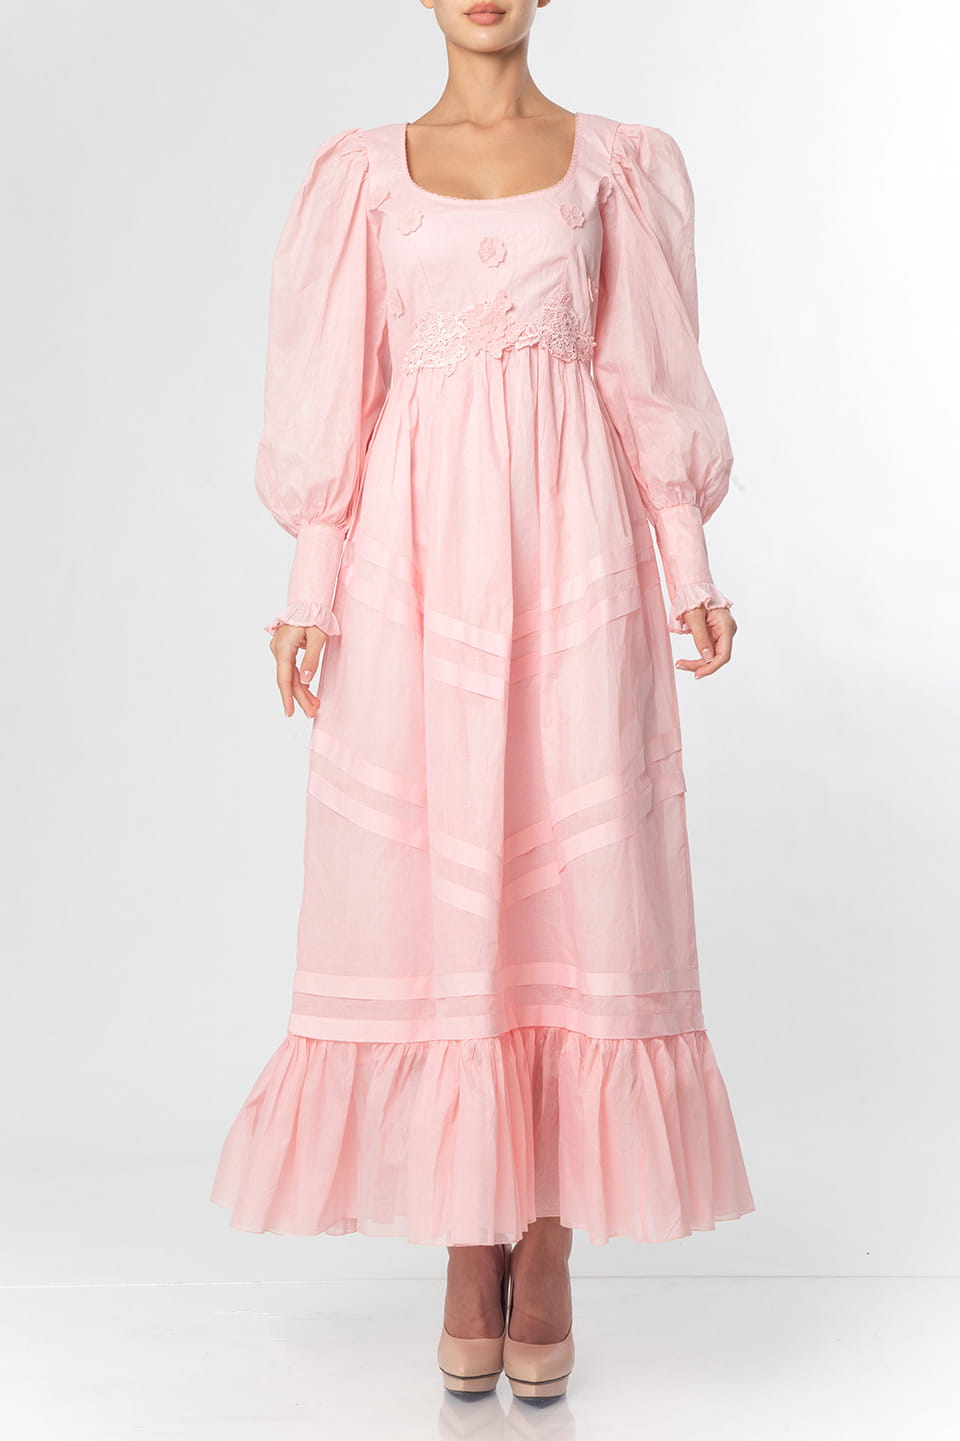 Thumbnail for Product gallery 4, Manoush religeuse long dress pink front step